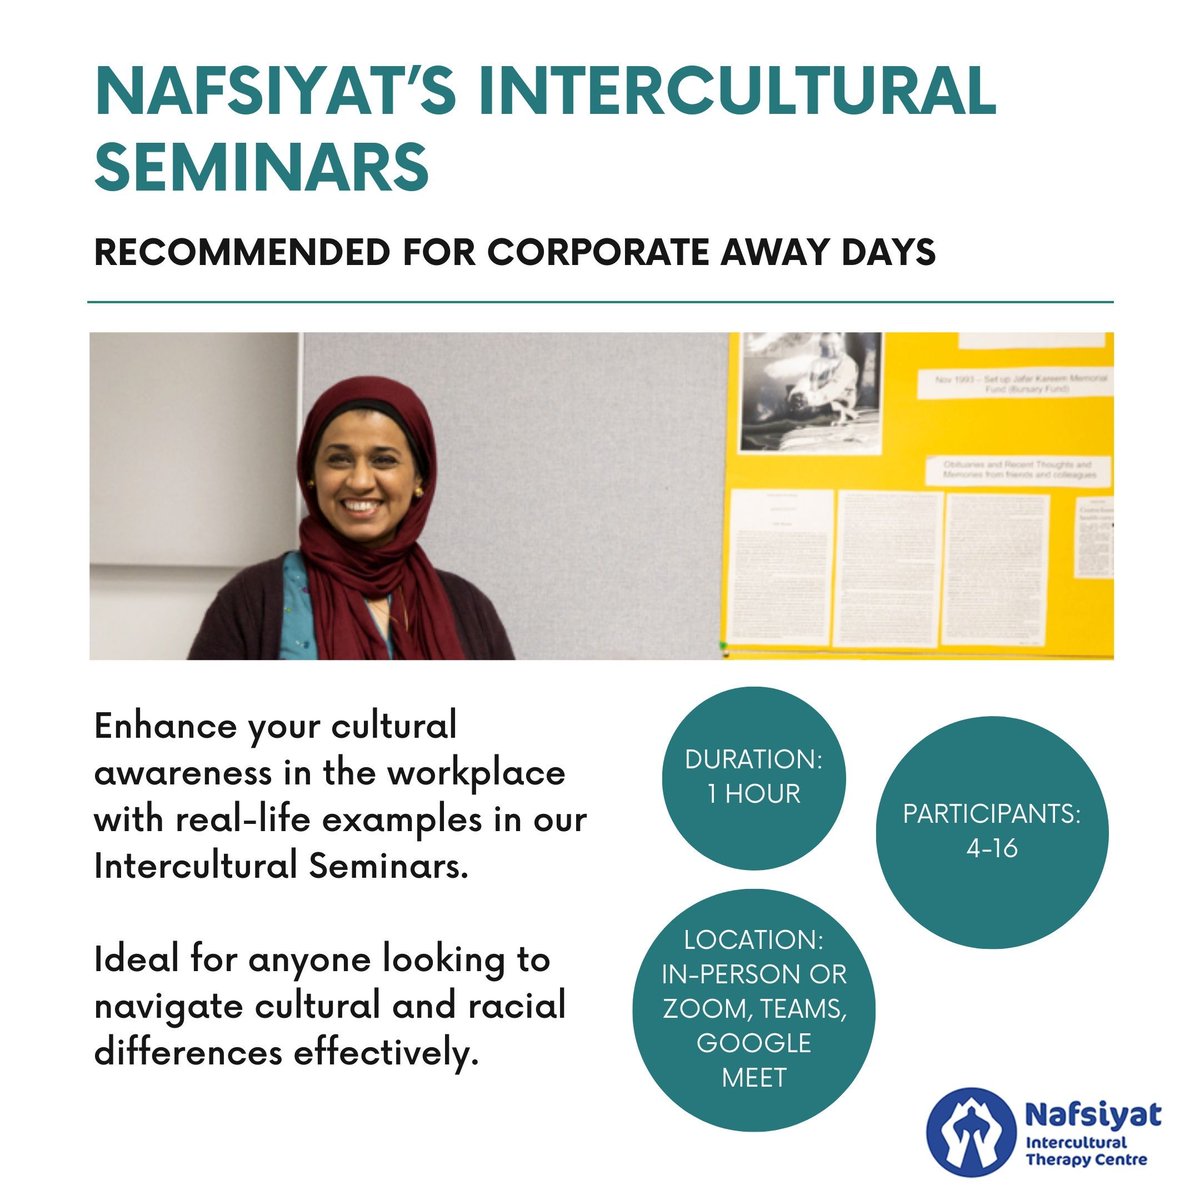 Enhance your cultural competency with Nafsiyat's Intercultural Seminars 🌍 To sign up or learn more go to buff.ly/4arKCnF or contact training@nafsiyat.org.uk #InterculturalCompetency #ProfessionalDevelopment #InterculturalSkills #CulturalCompetence #TeamTraining